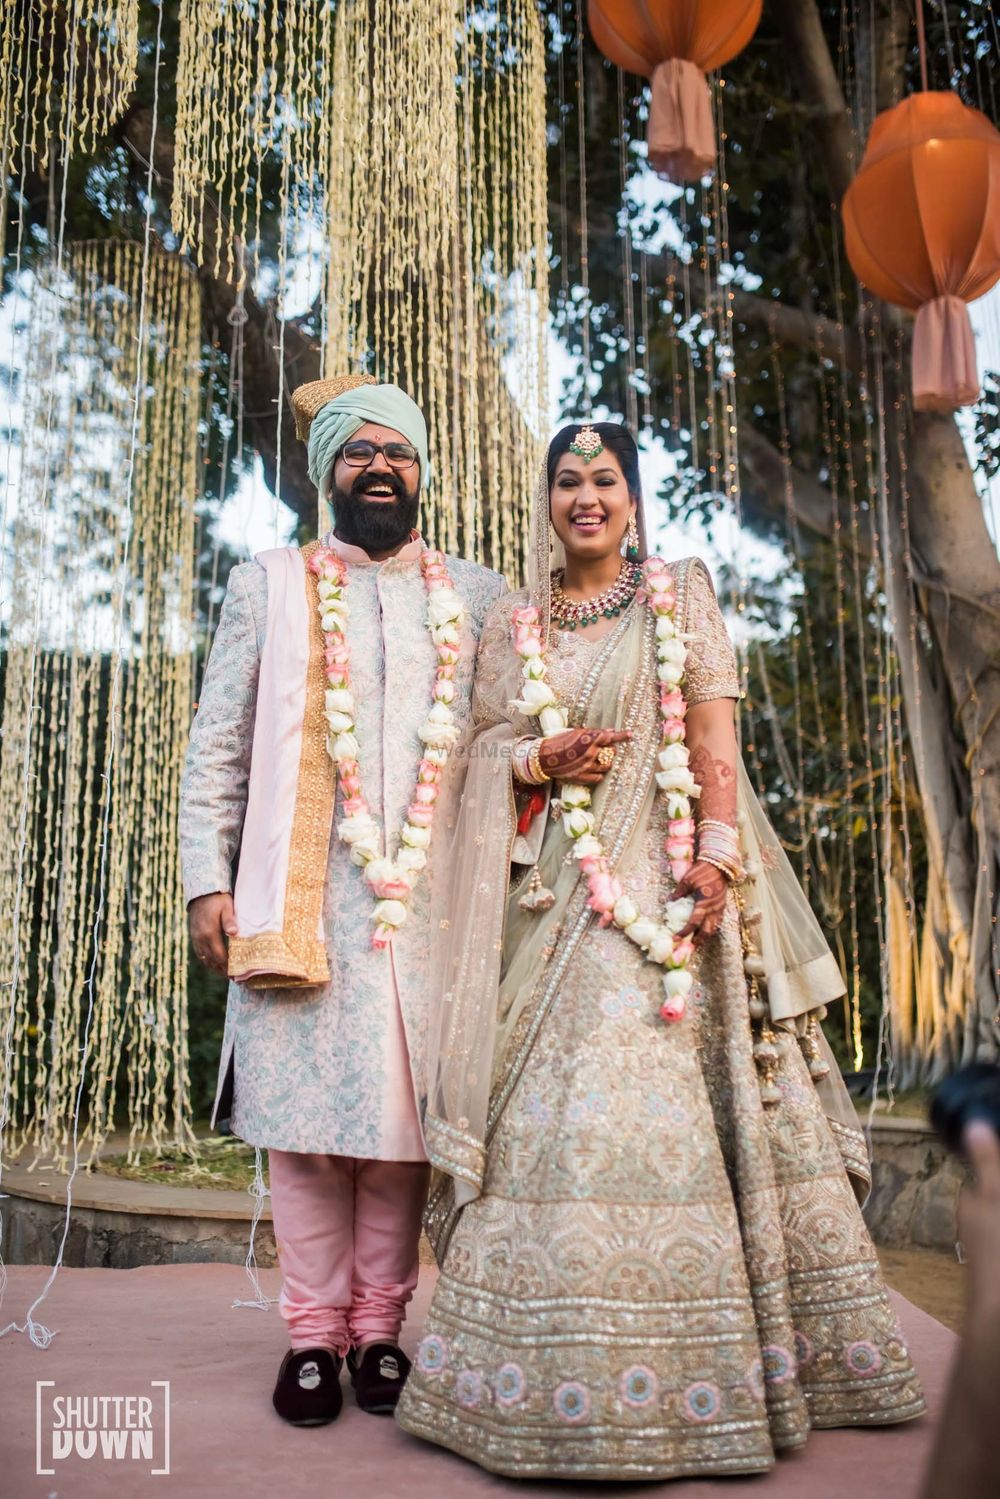 Photo of A bride and groom laugh as they clicked on their wedding day